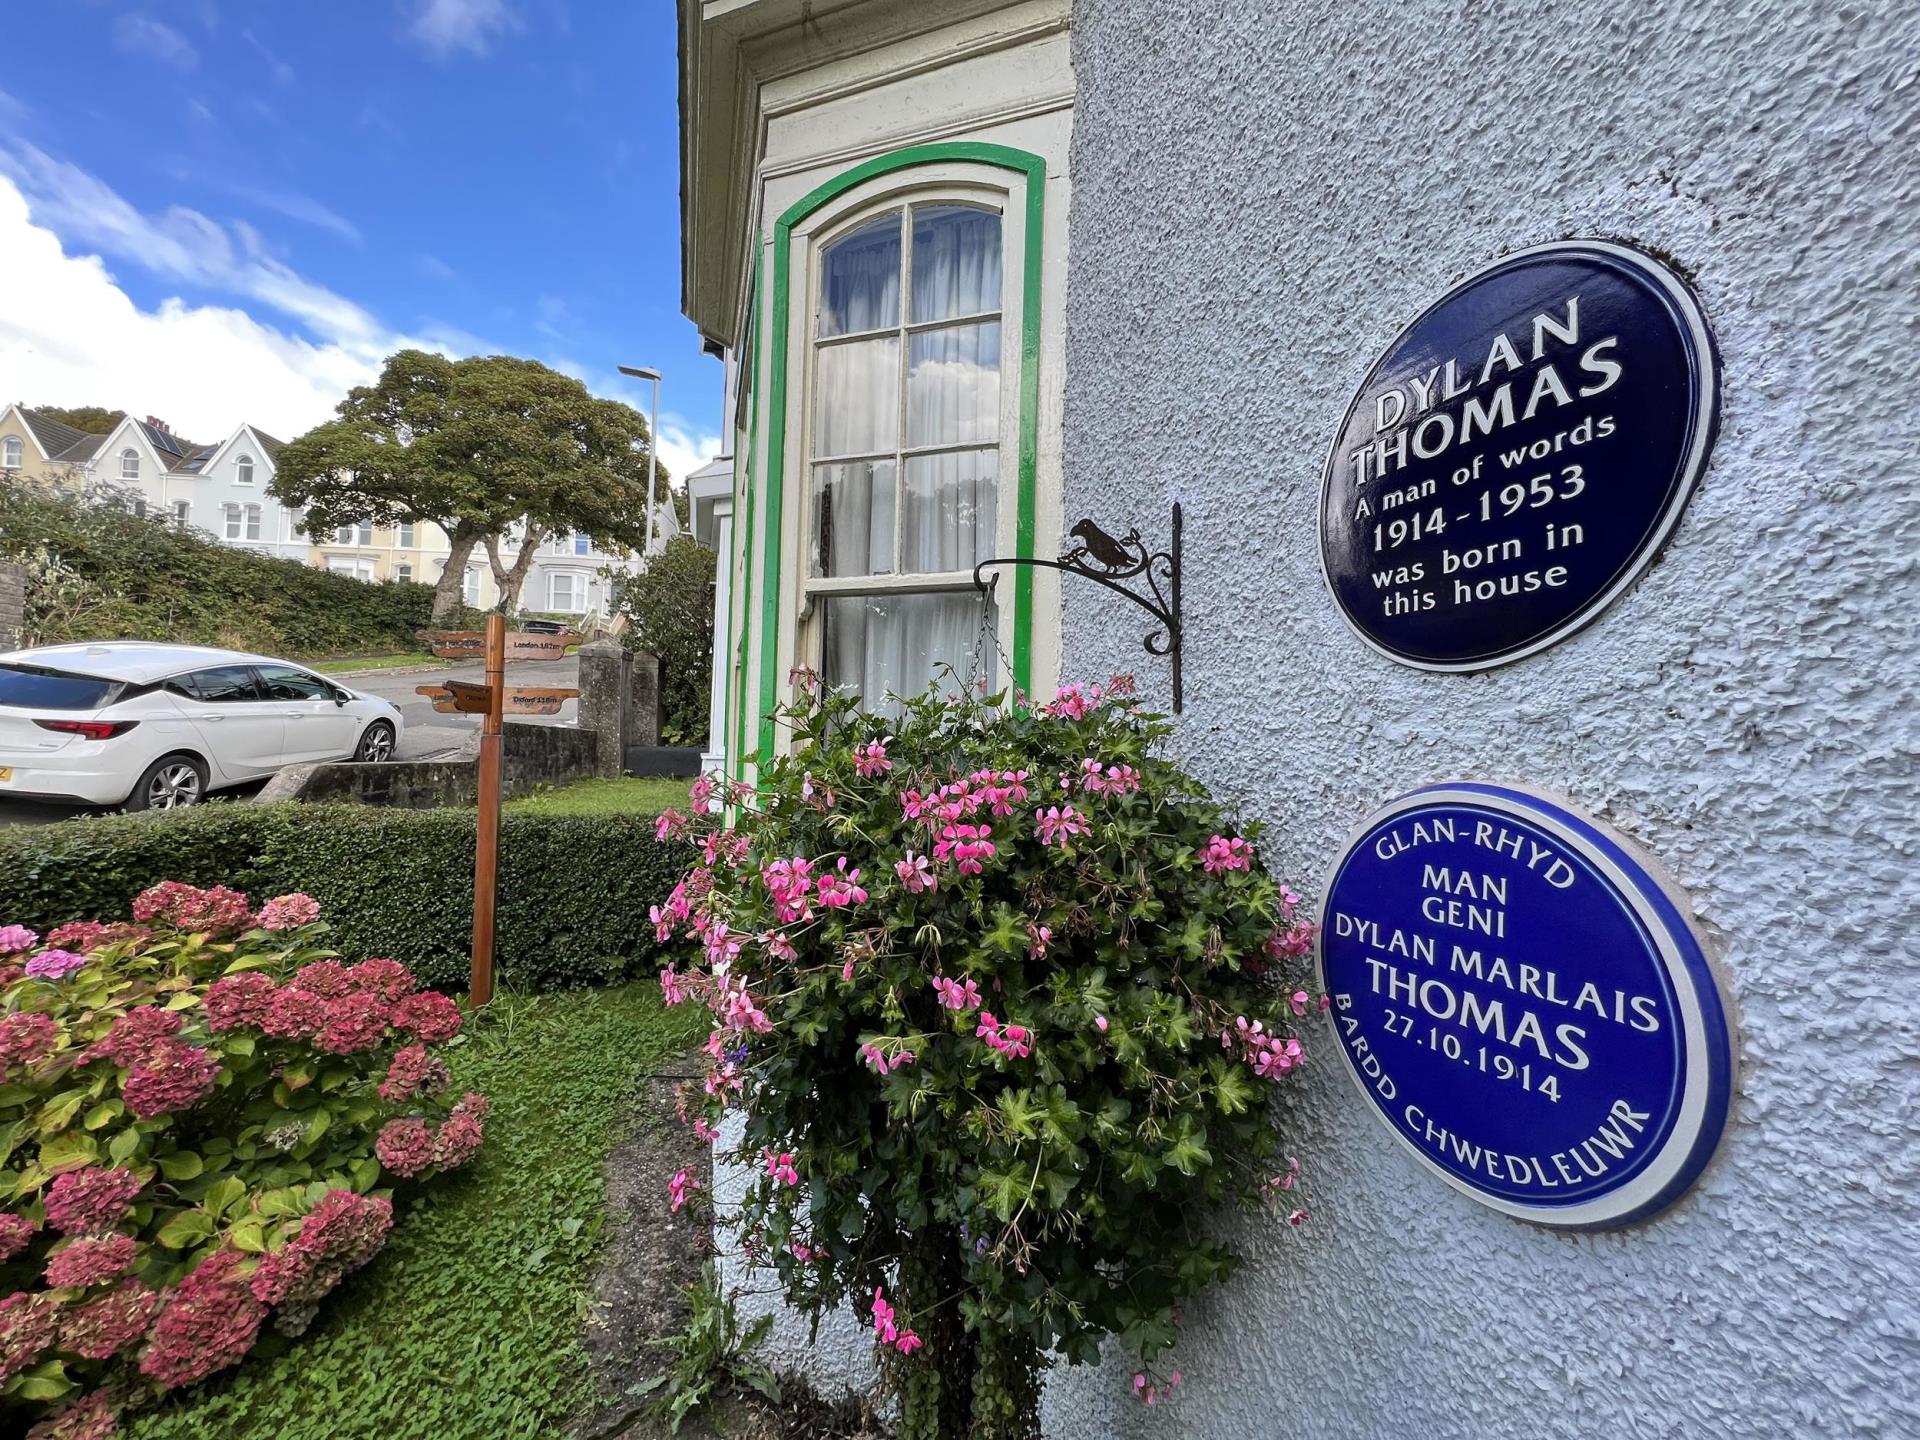 Blue Plaques at Dylan's